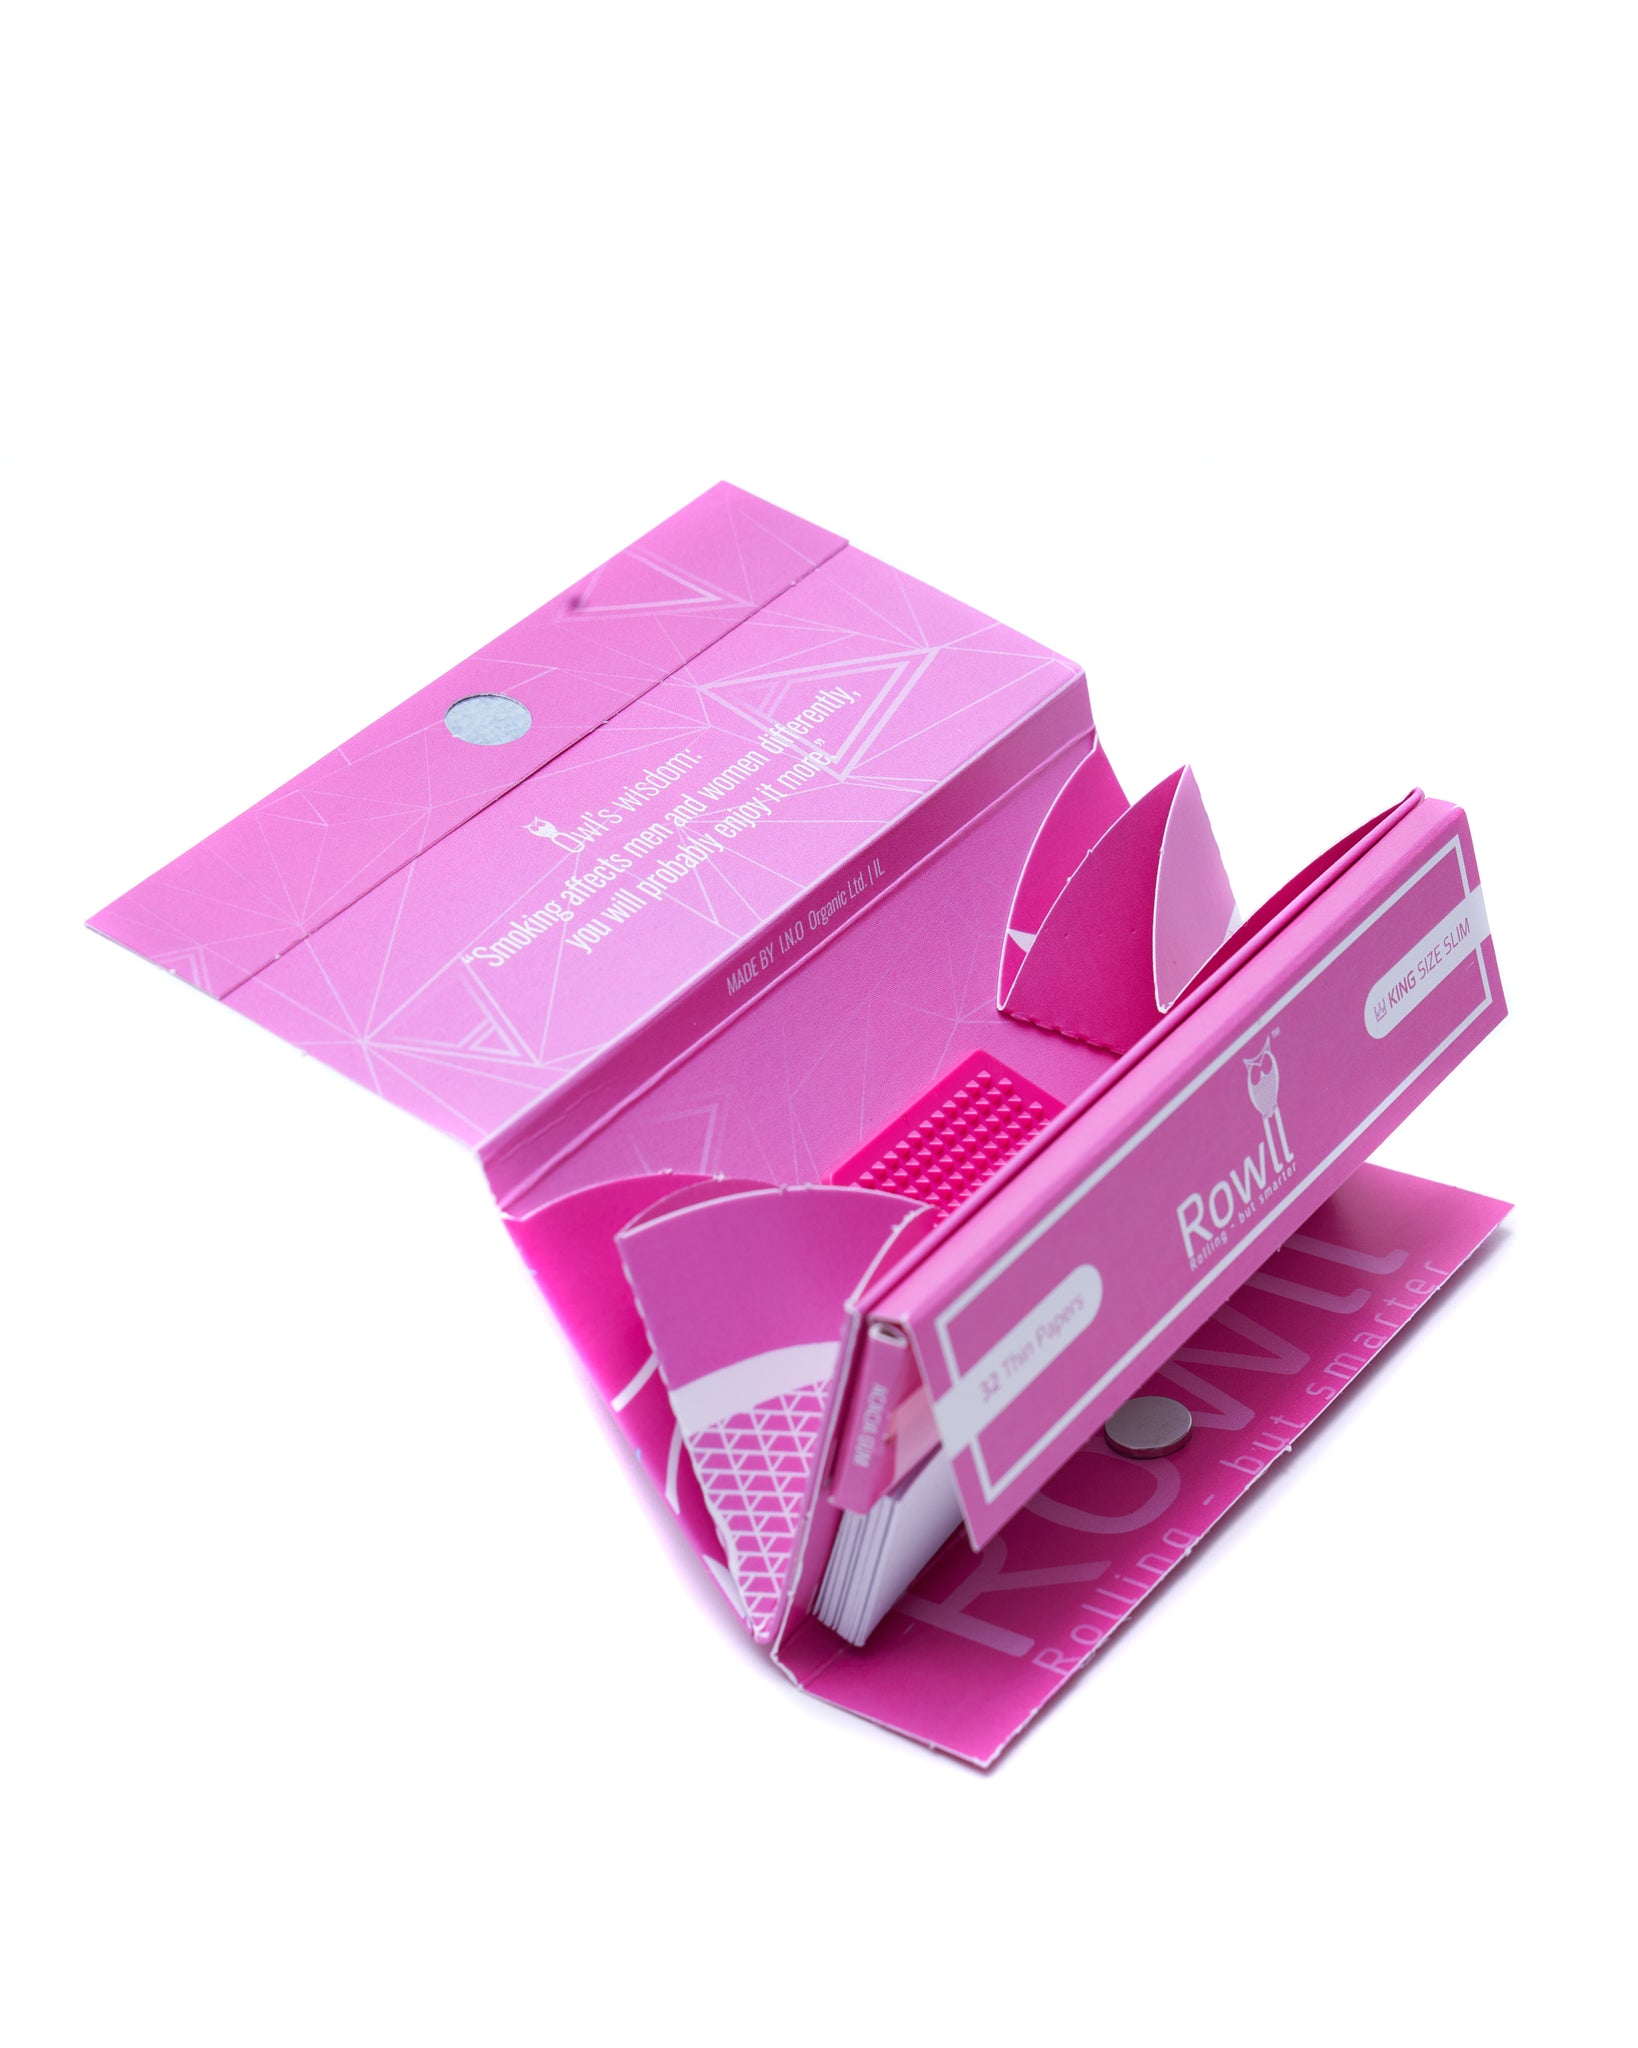 ROWLL Pink all in 1 Rolling kit -LIMITED EDITION- – Rowll - Rolling but  smarter